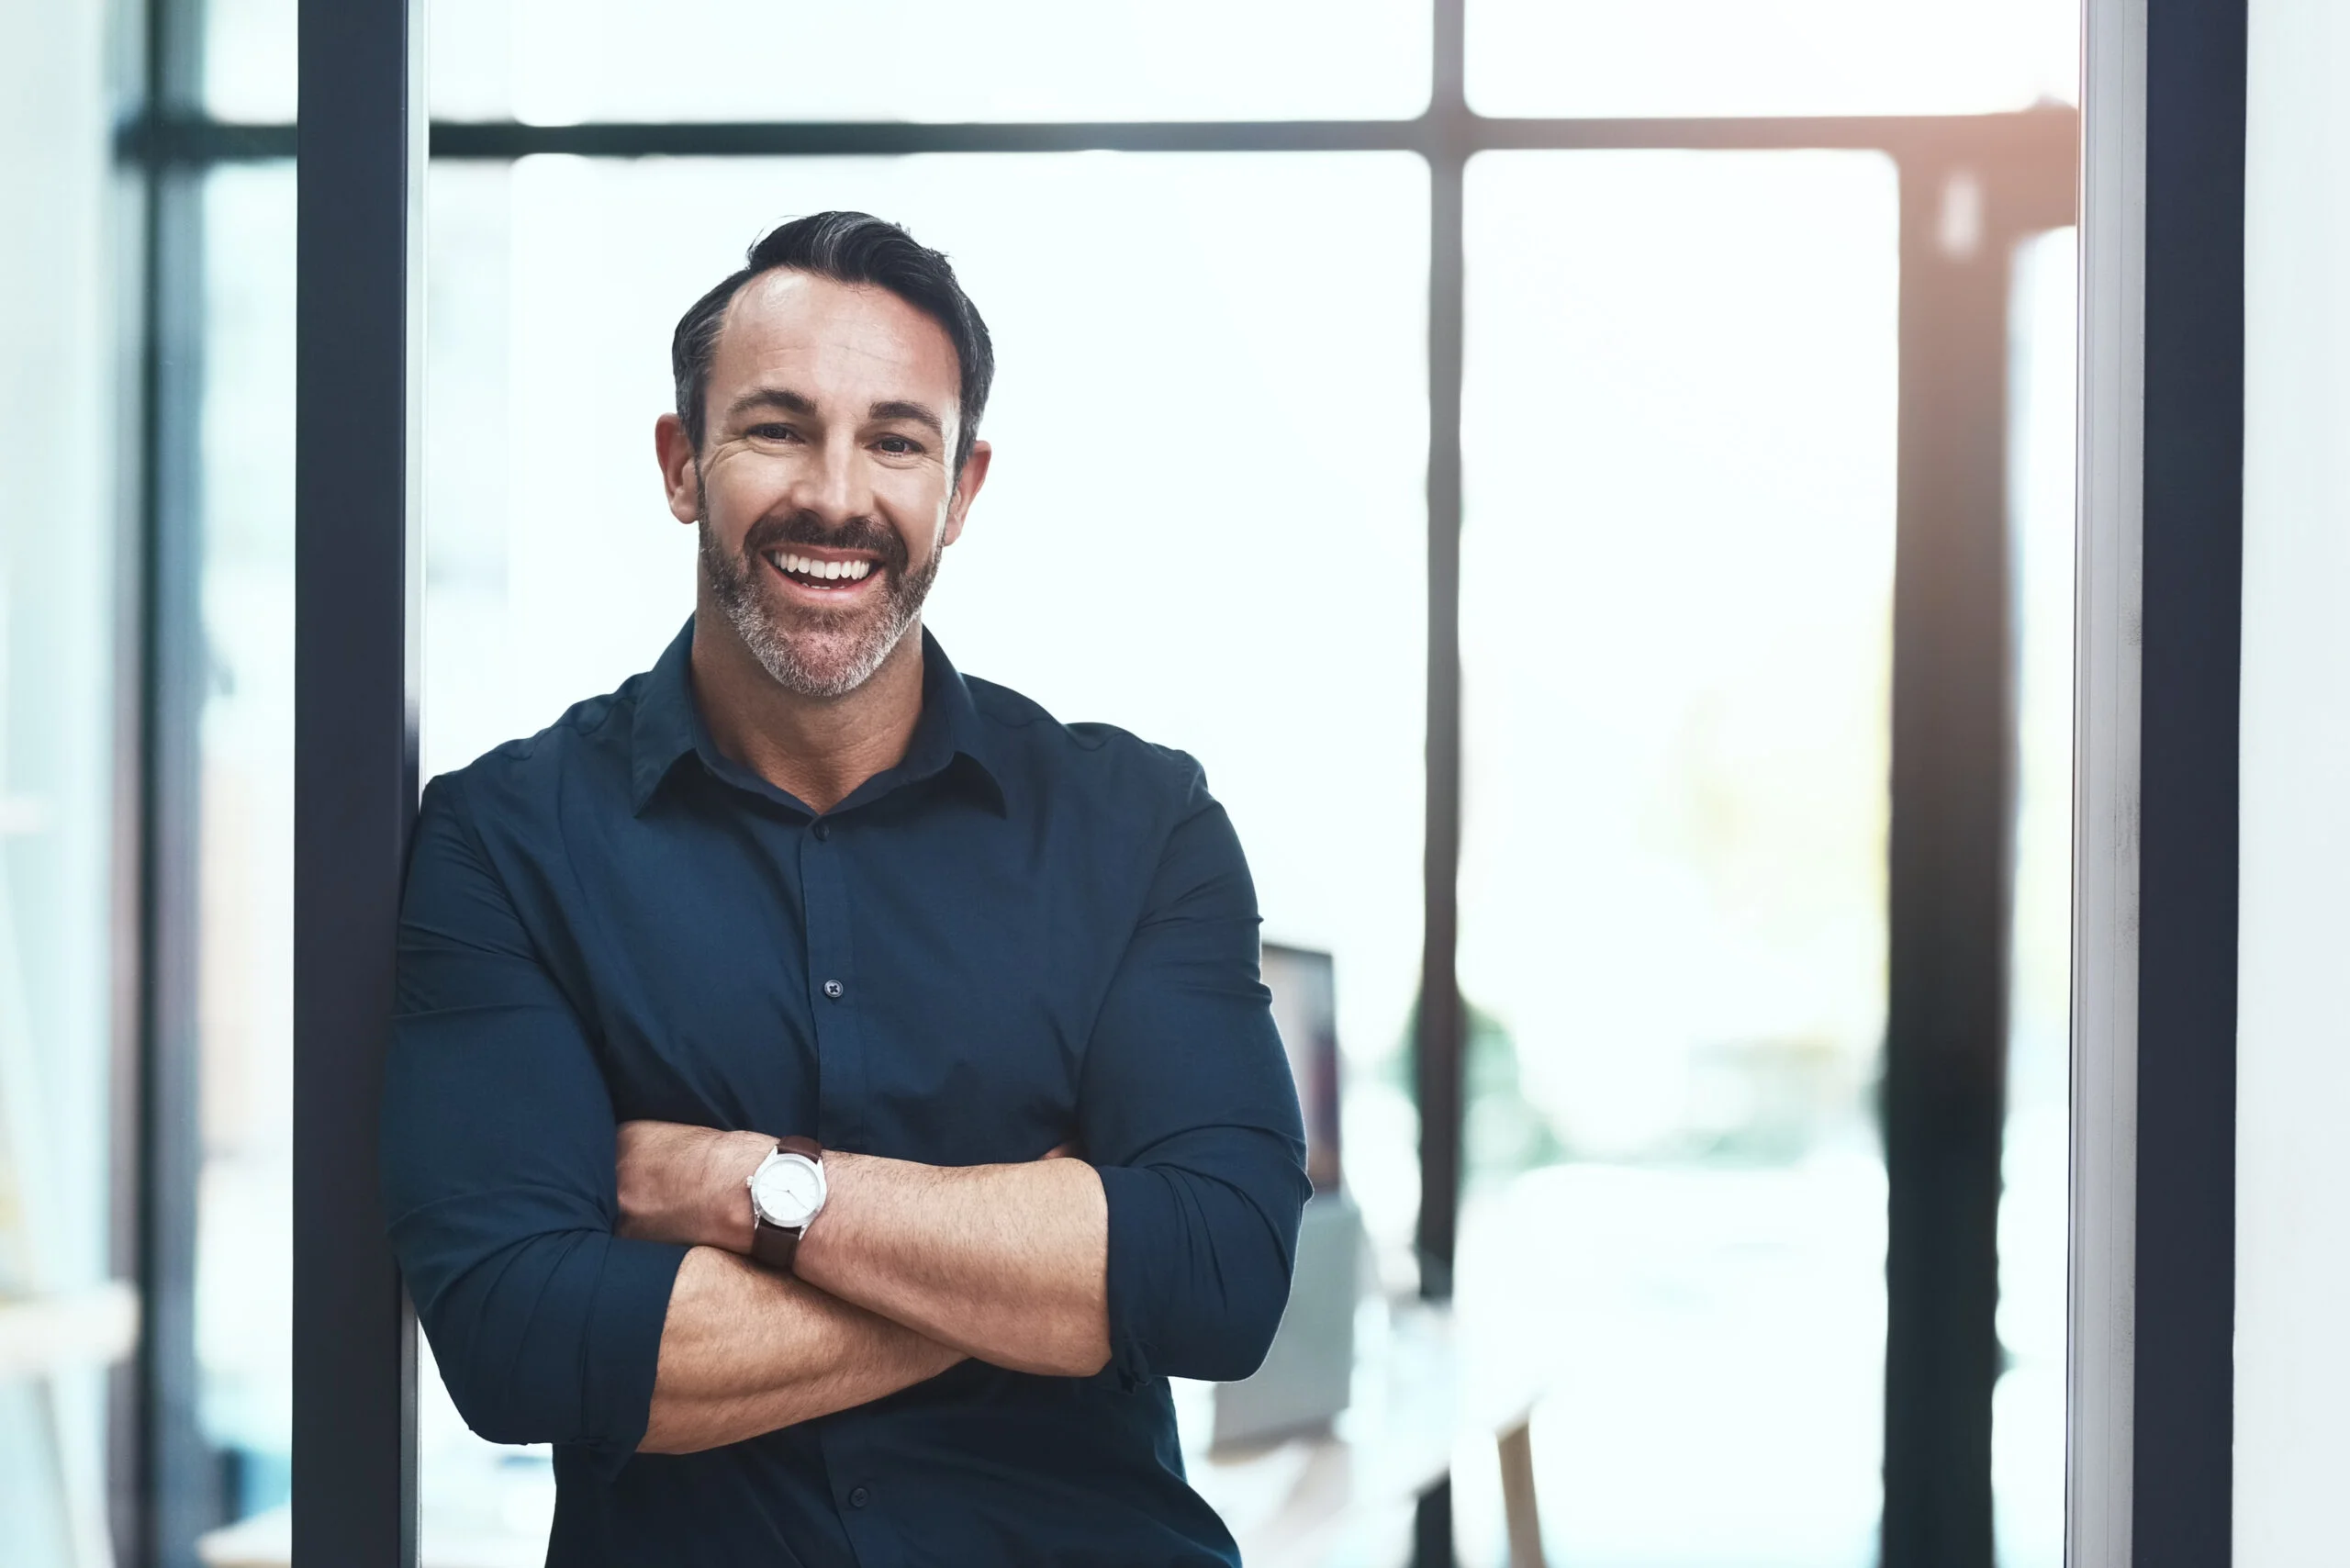 Office, smile and portrait of businessman with arms crossed corporate, job for or confidence in career. Mature person, face and architect at work with ambition, satisfaction or happiness in Australia